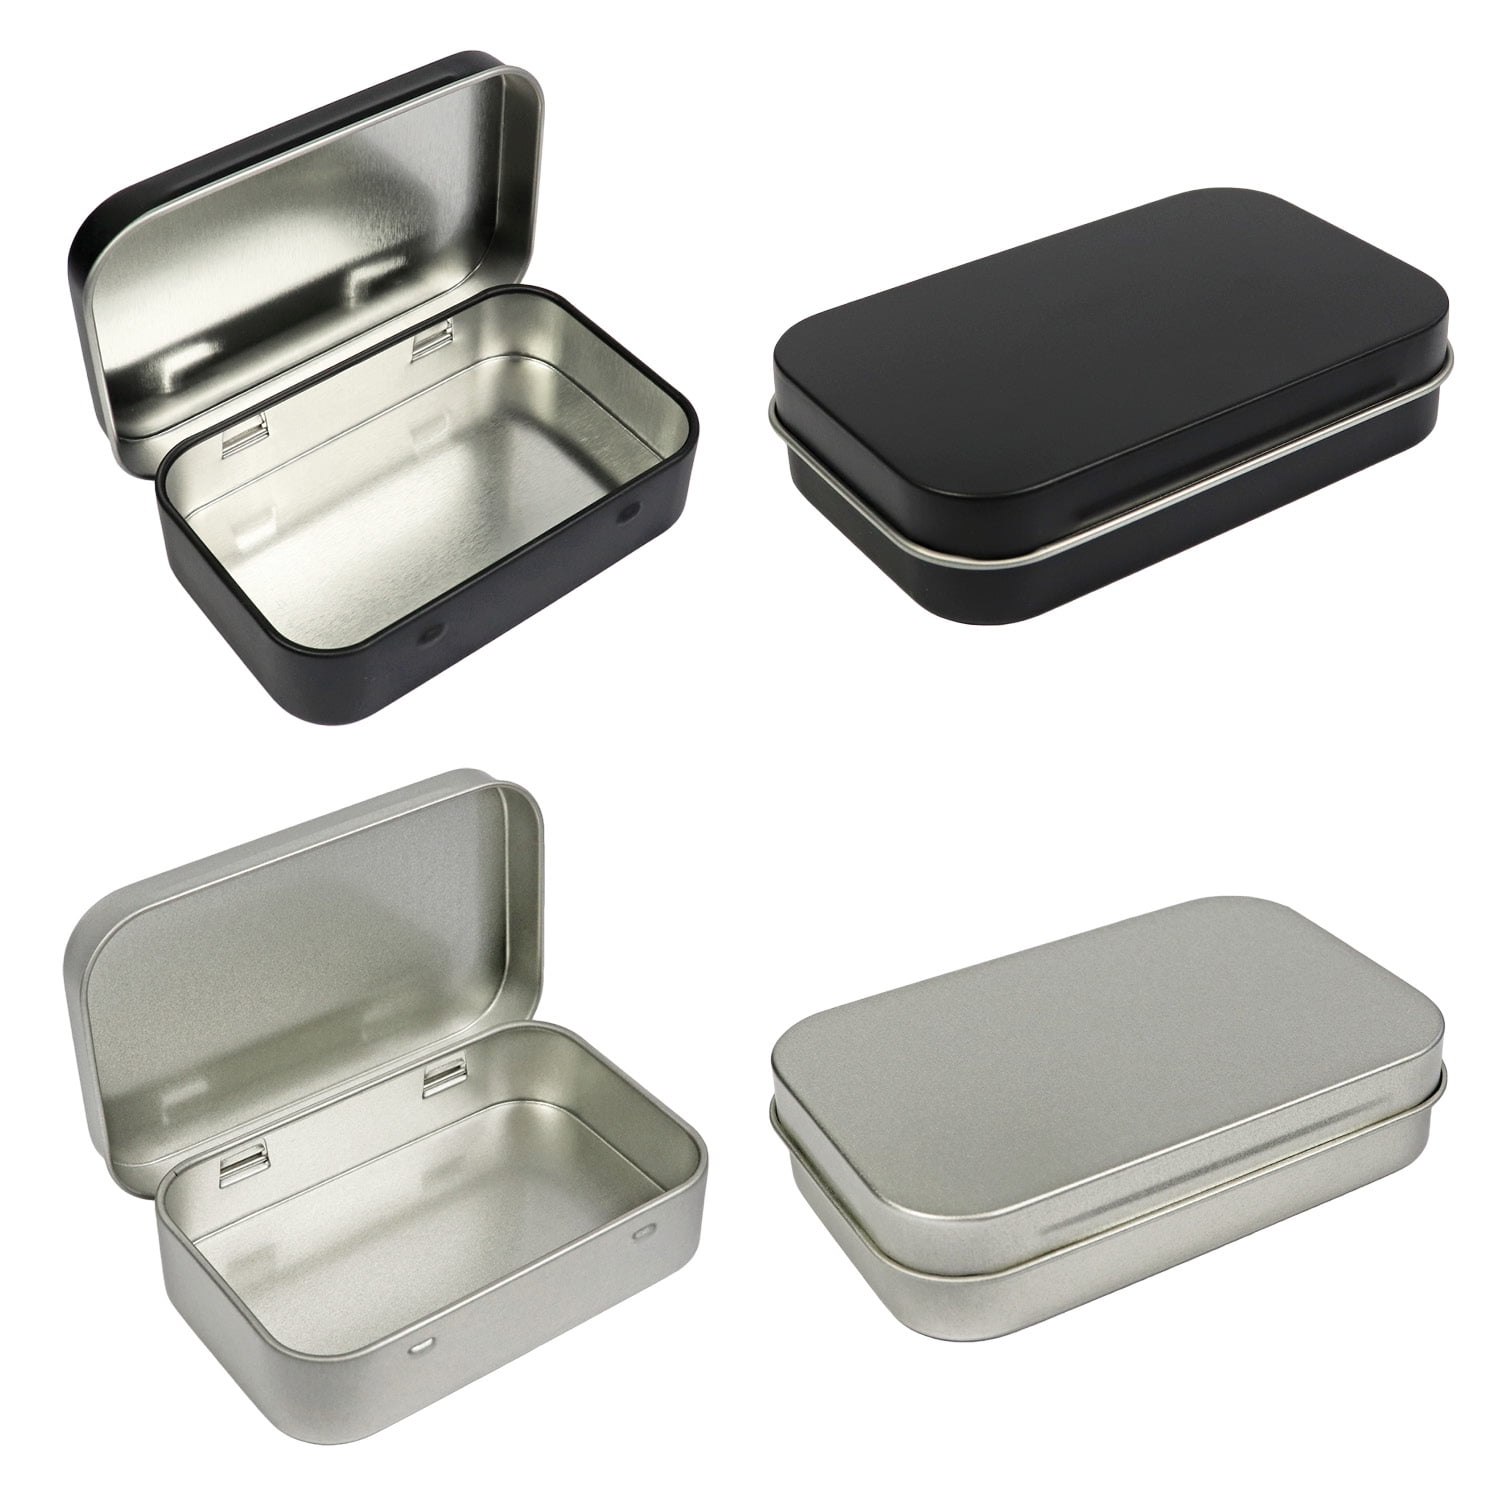 4 Pack Metal Rectangular Empty Hinged Tins Box Containers 3.75 by